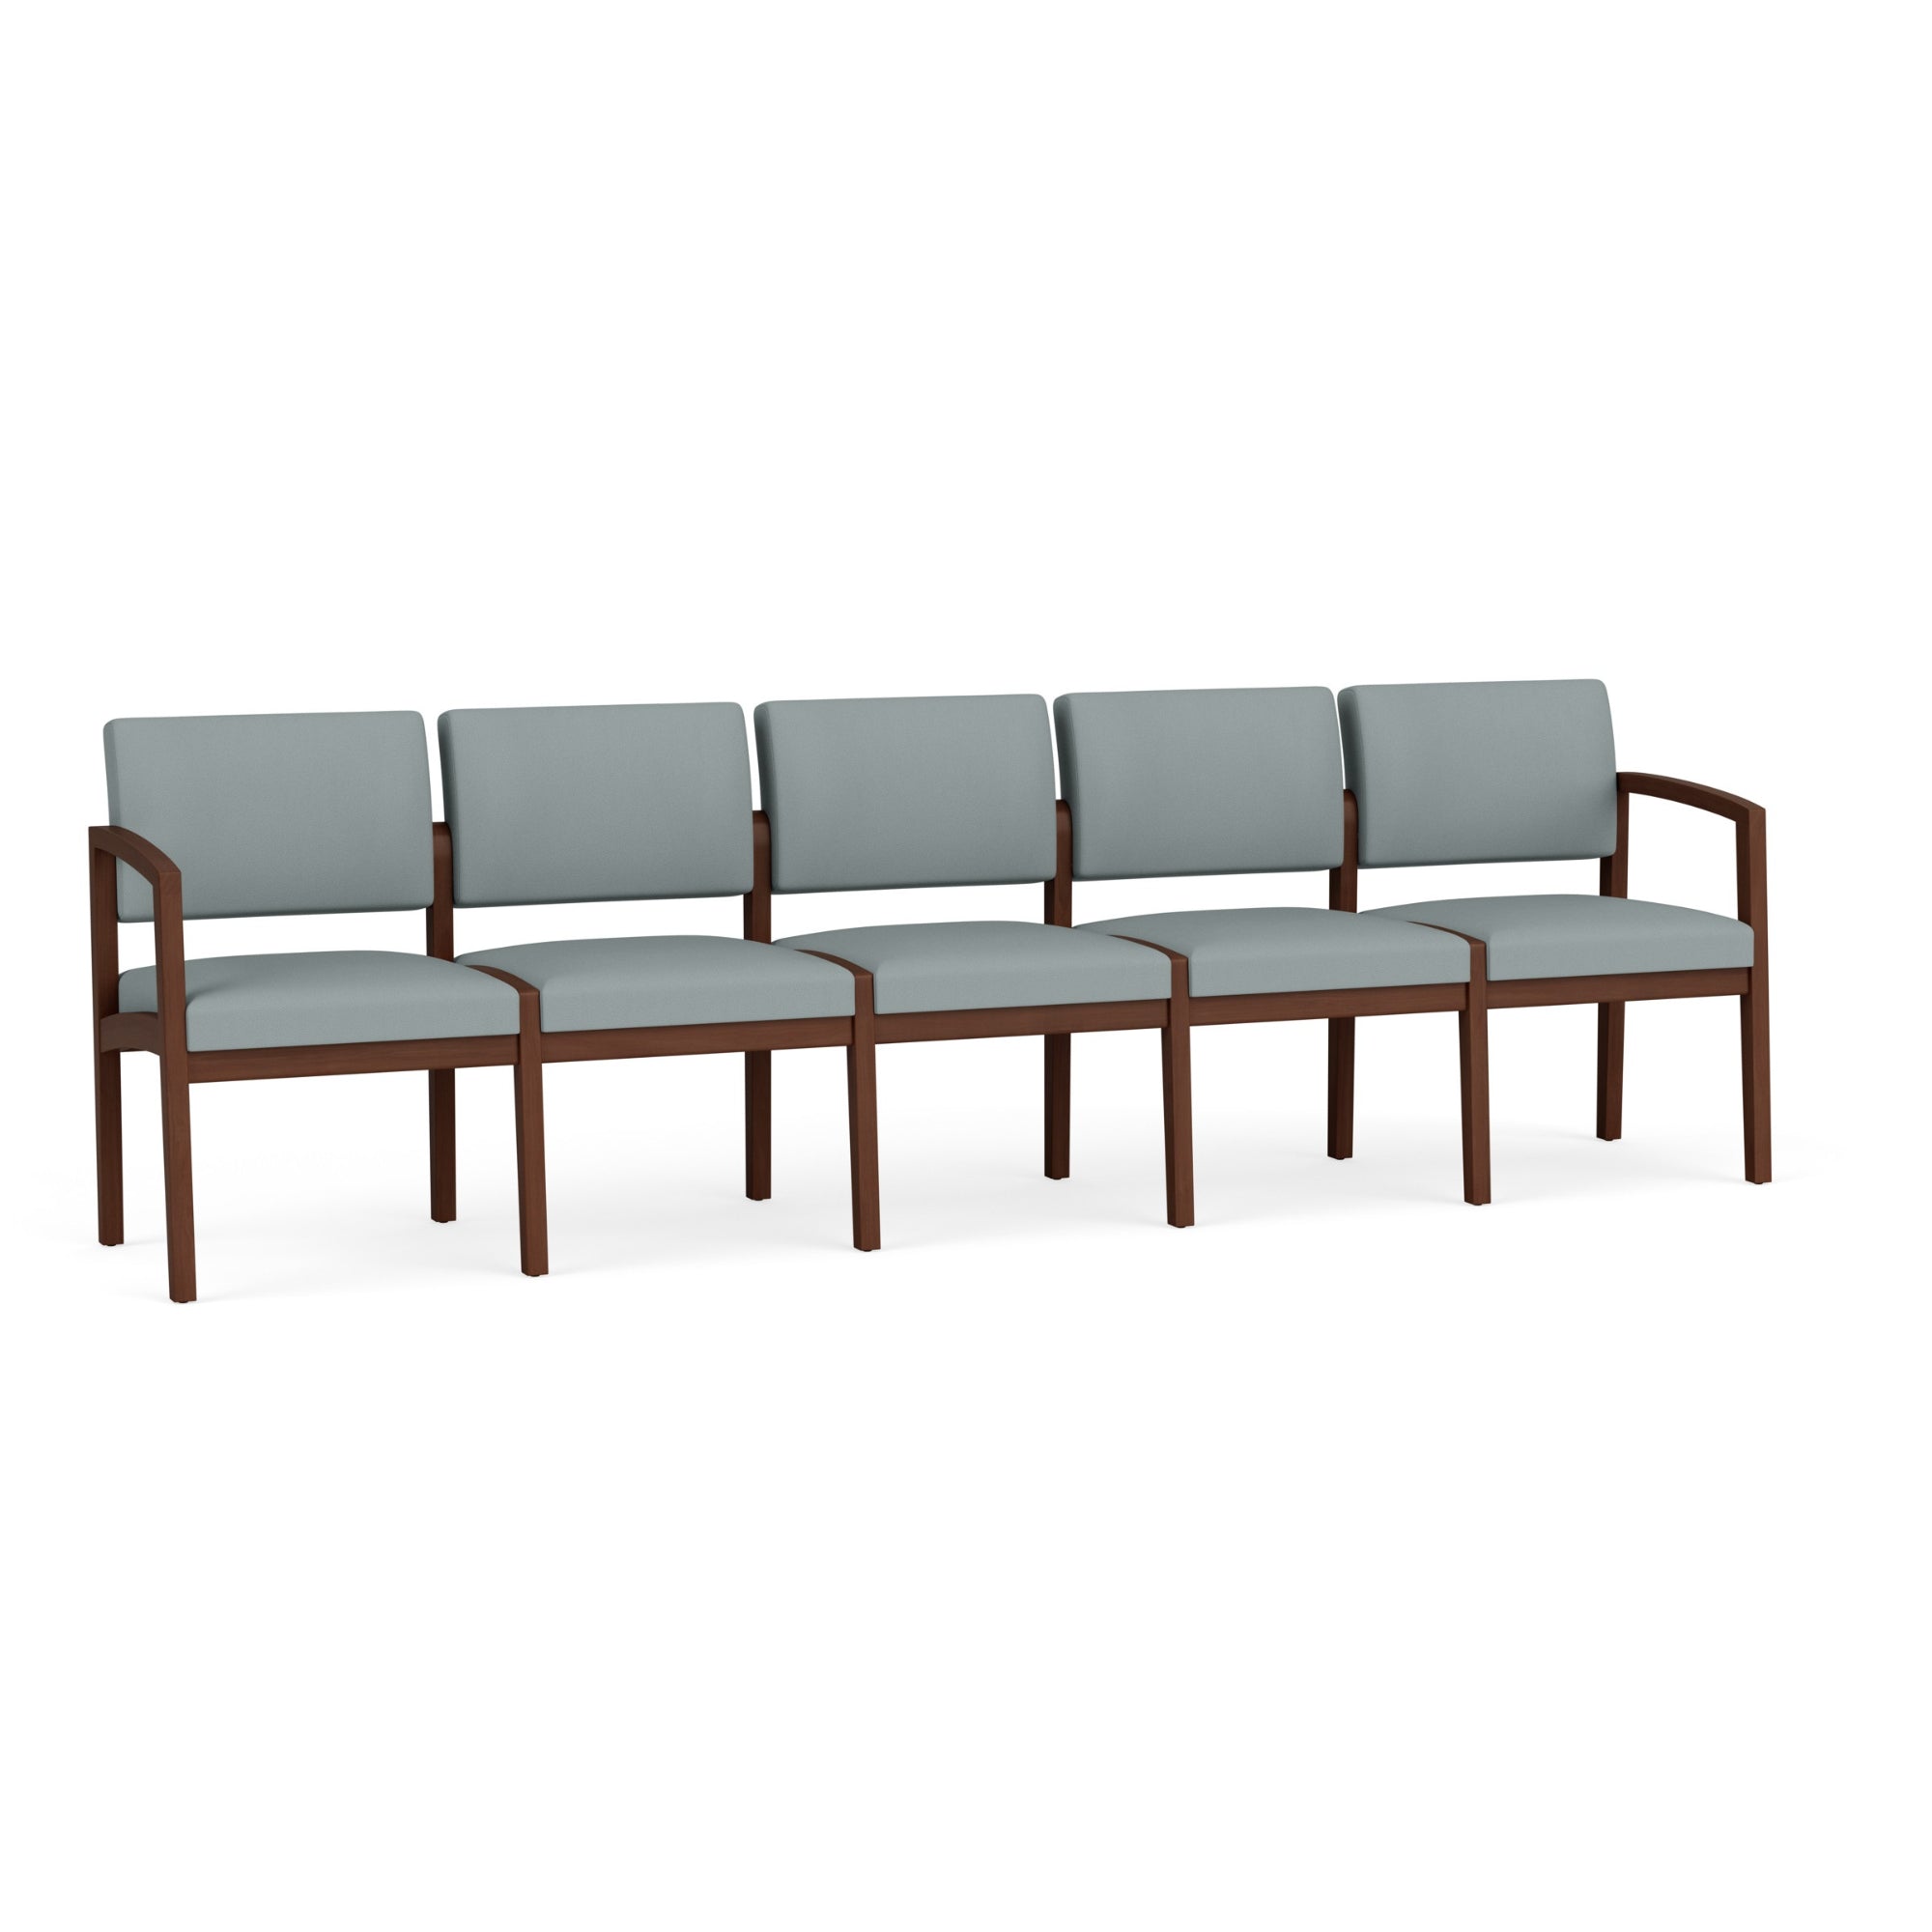 Lenox Wood Collection Reception Seating, 5 Seat Sofa, Standard Fabric Upholstery, FREE SHIPPING